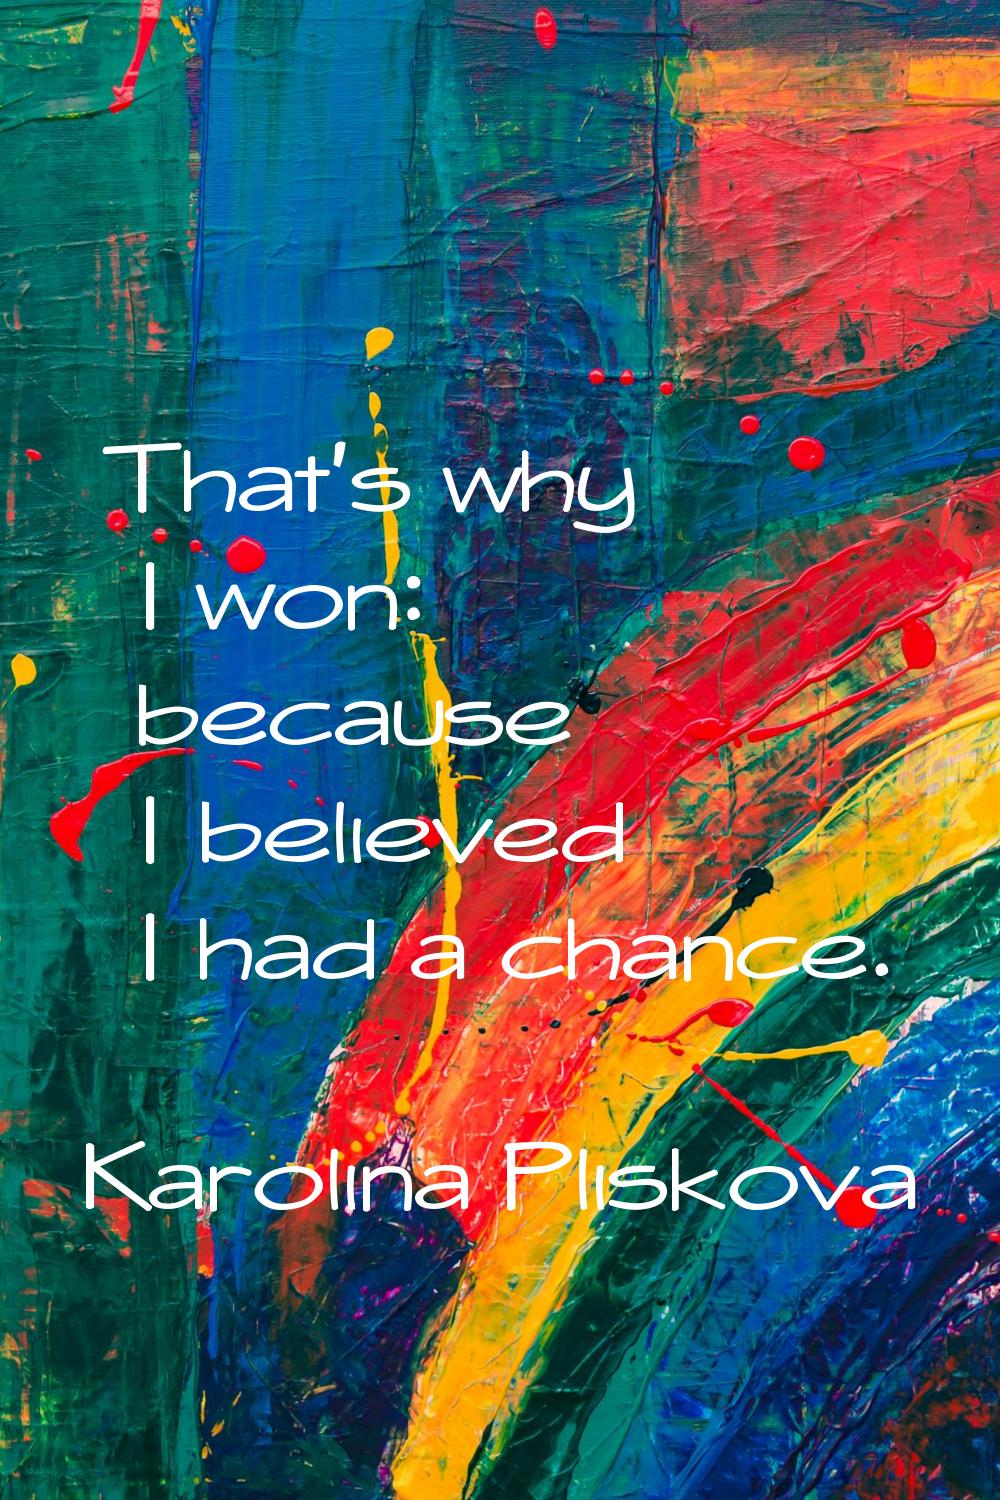 That's why I won: because I believed I had a chance.